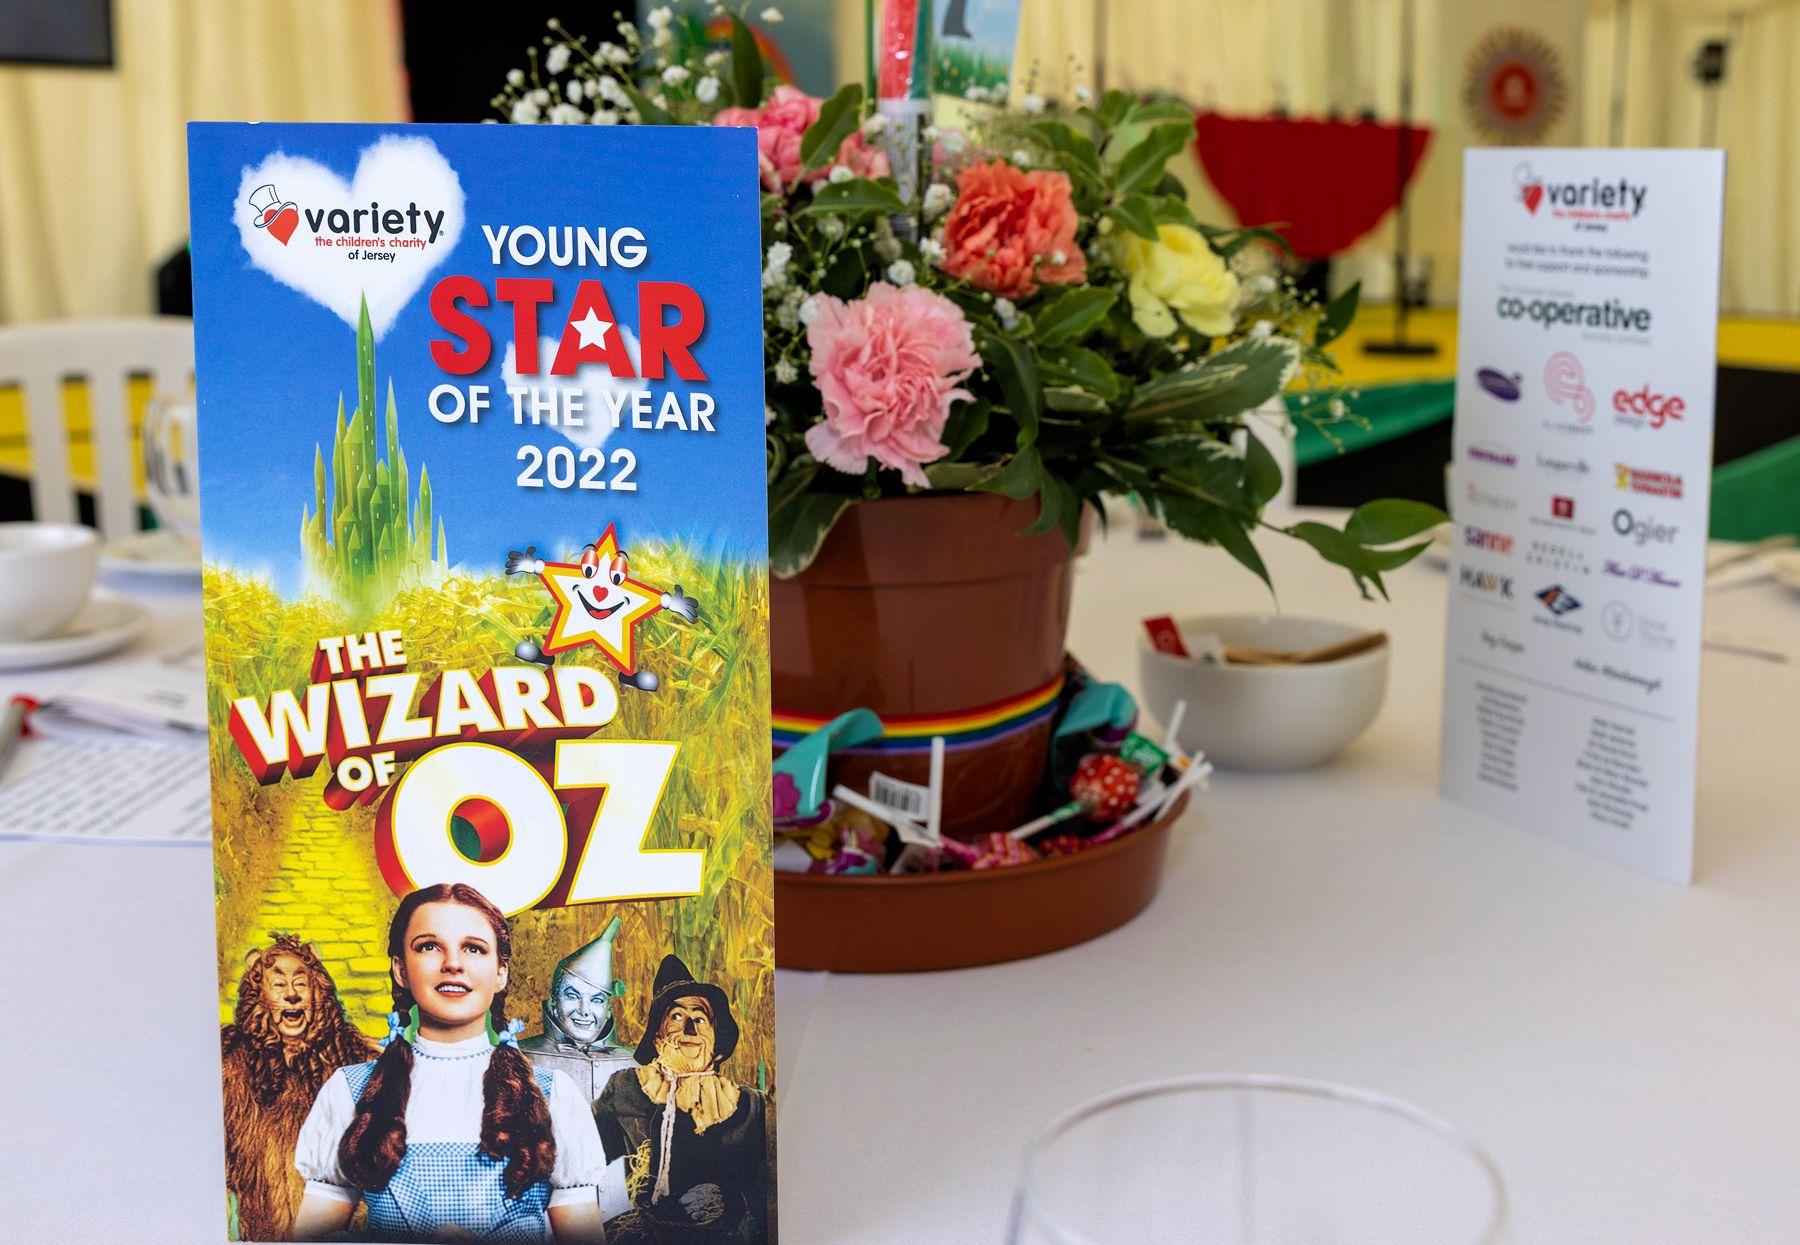 Variety - Young star of the year 2022